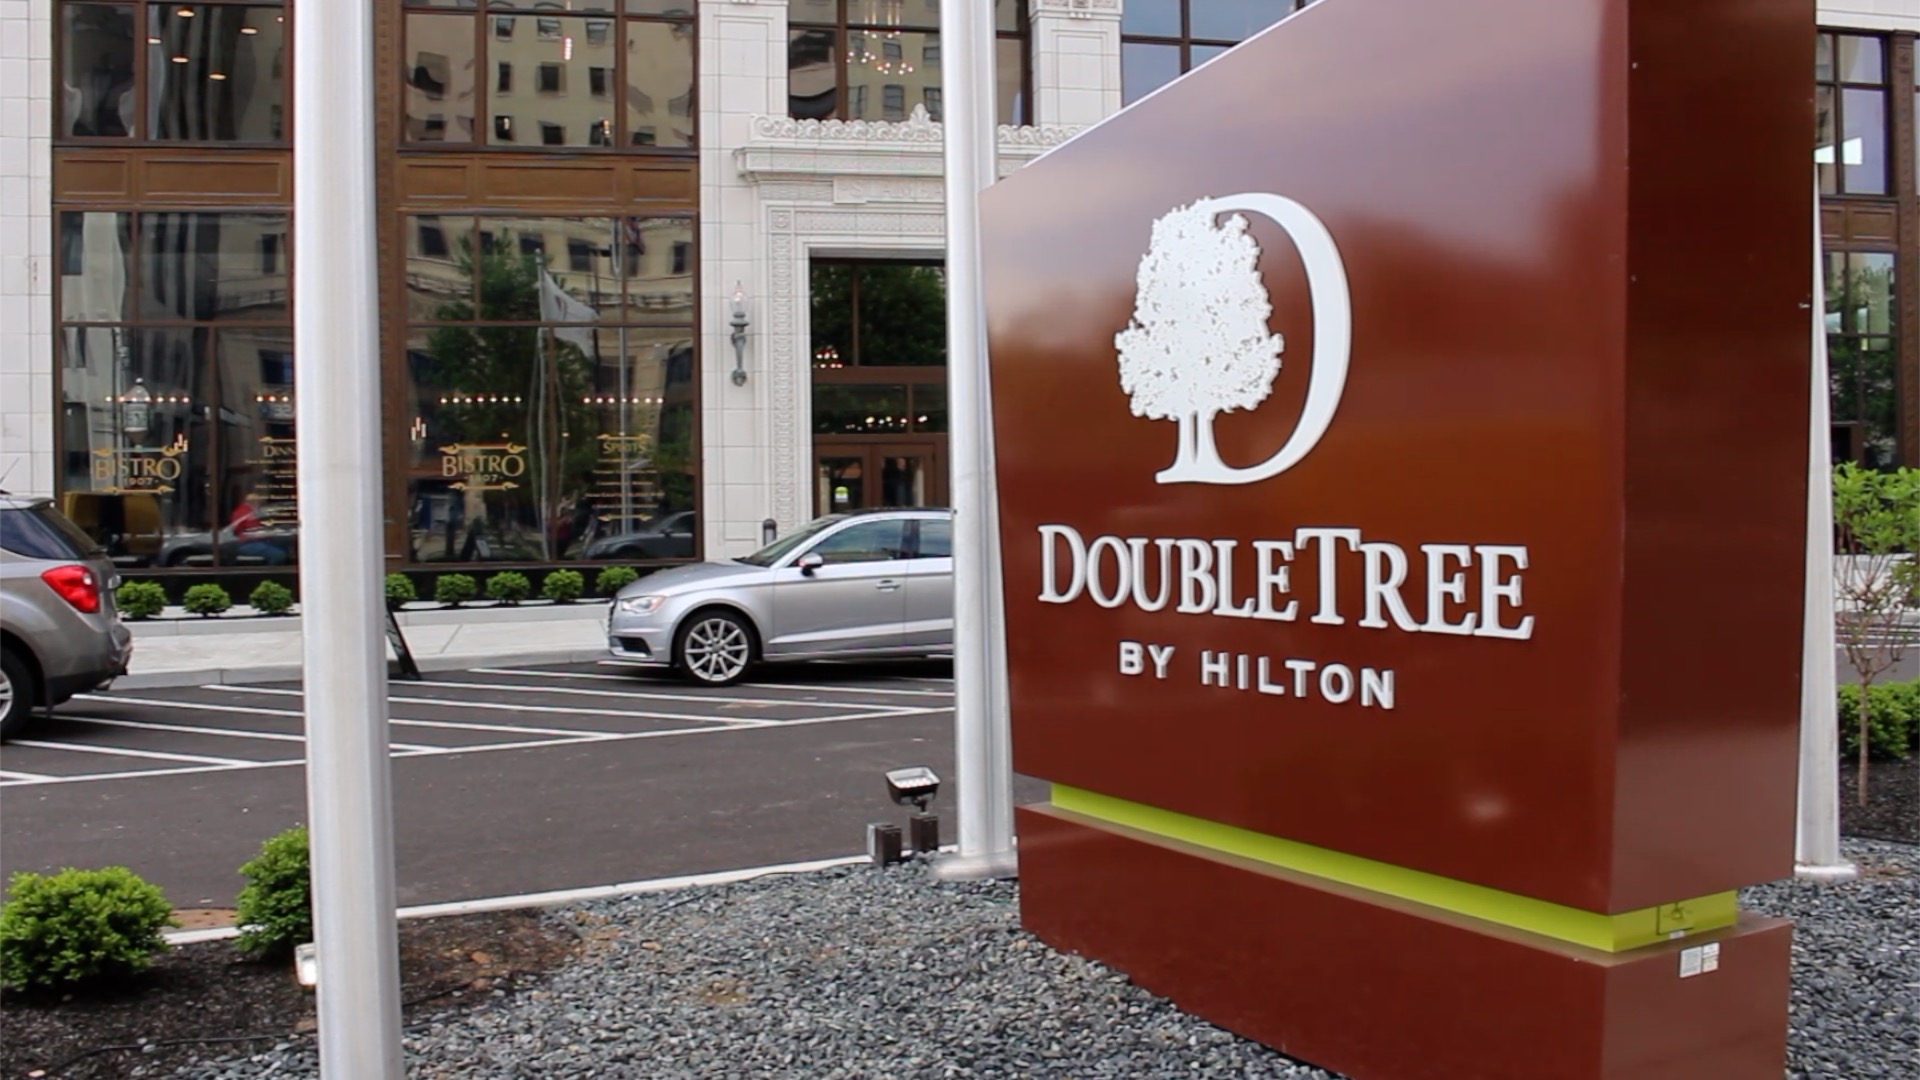 DoubleTree by Hilton Youngstown